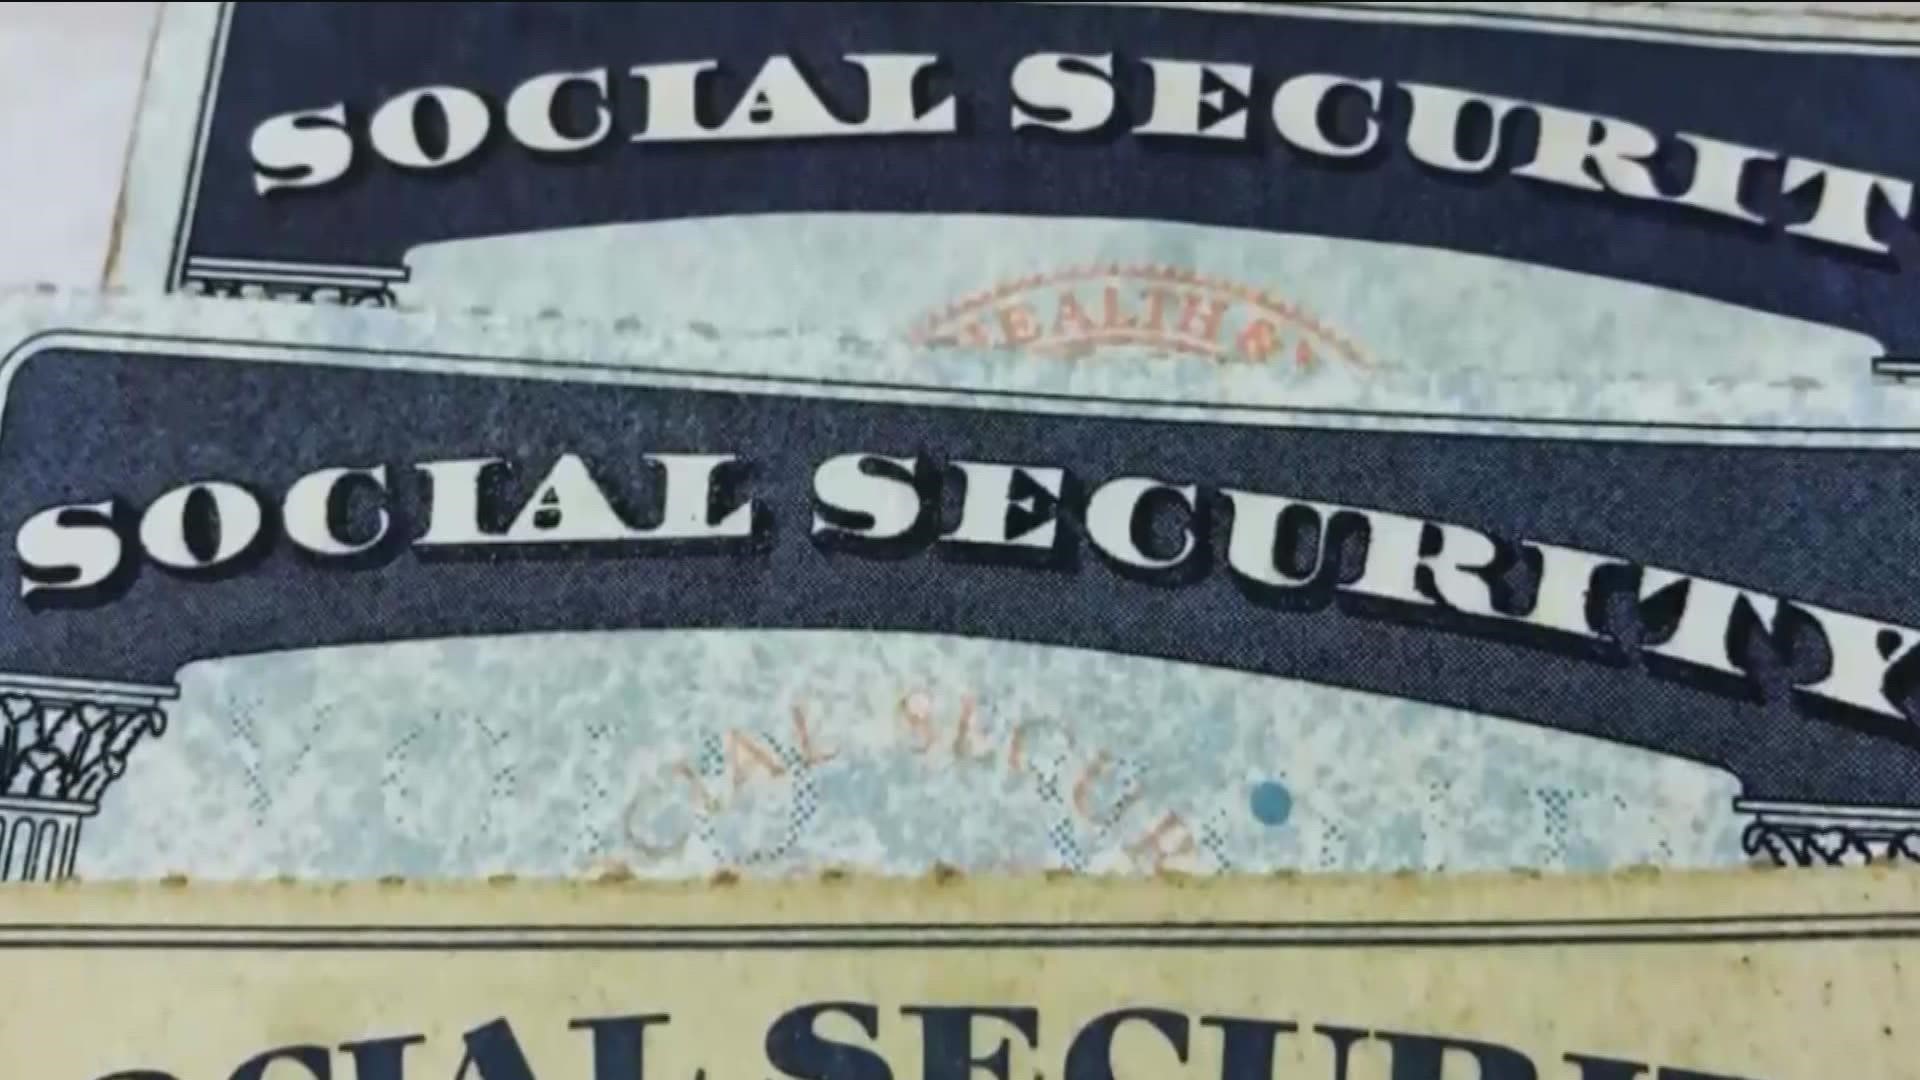 Social security recipients will see a raise of 8.7% next year, which will follow up on the 5.9% increase in 2022.